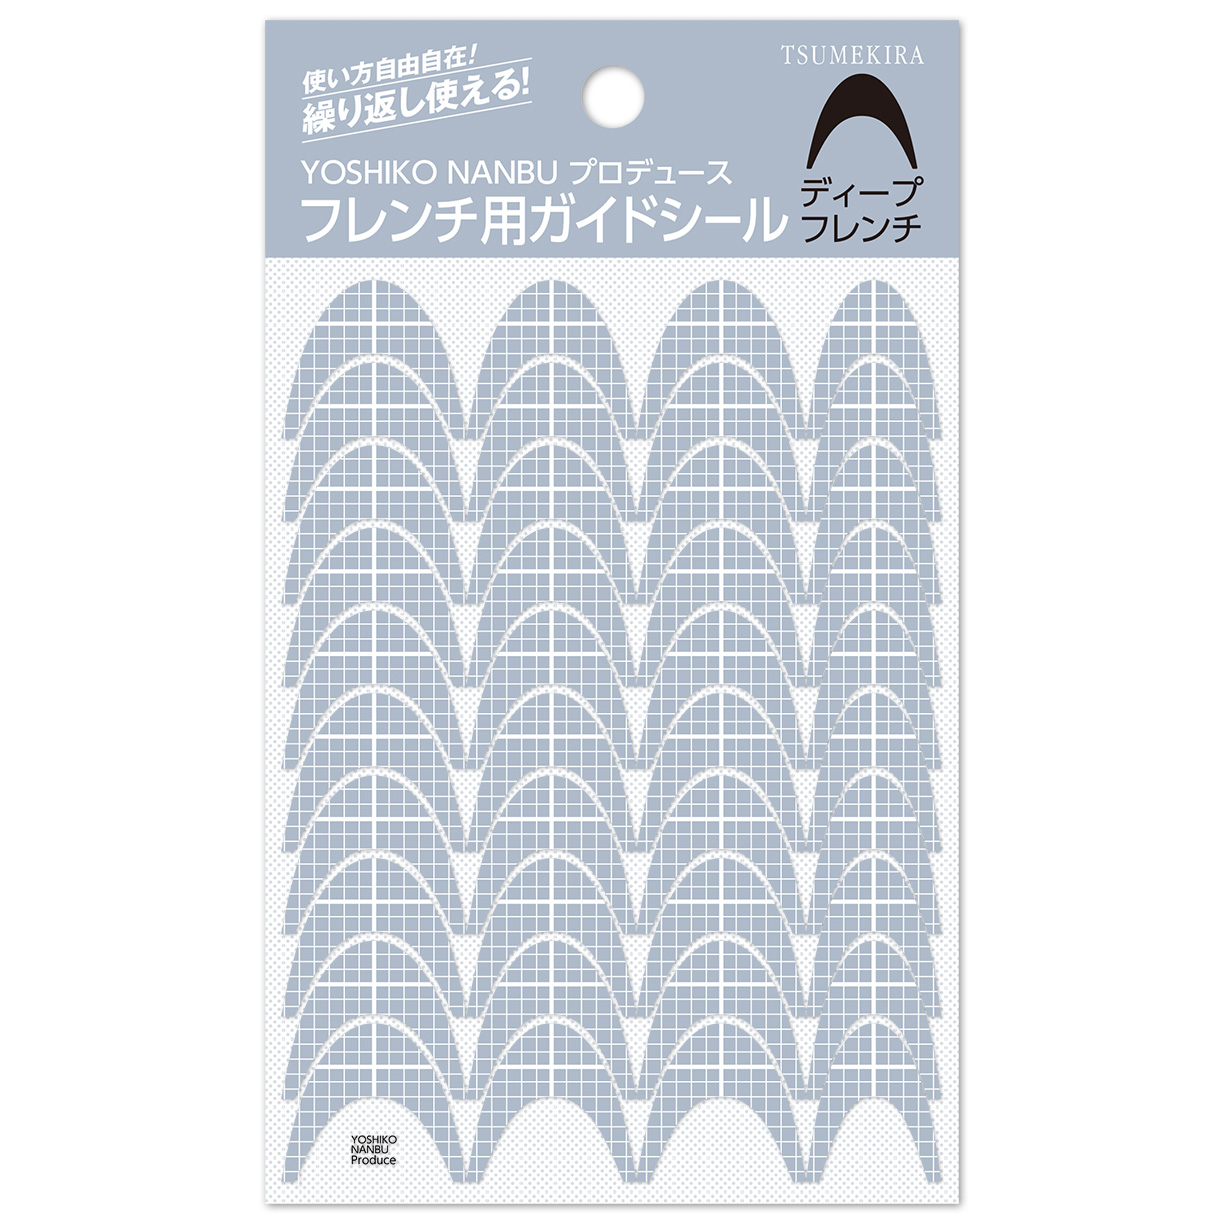 [On order/not returnable] NN-FGD-002 YOSHIKONANBU Produced French Guide Stickers Deep 2 Claw Nail (sheets)